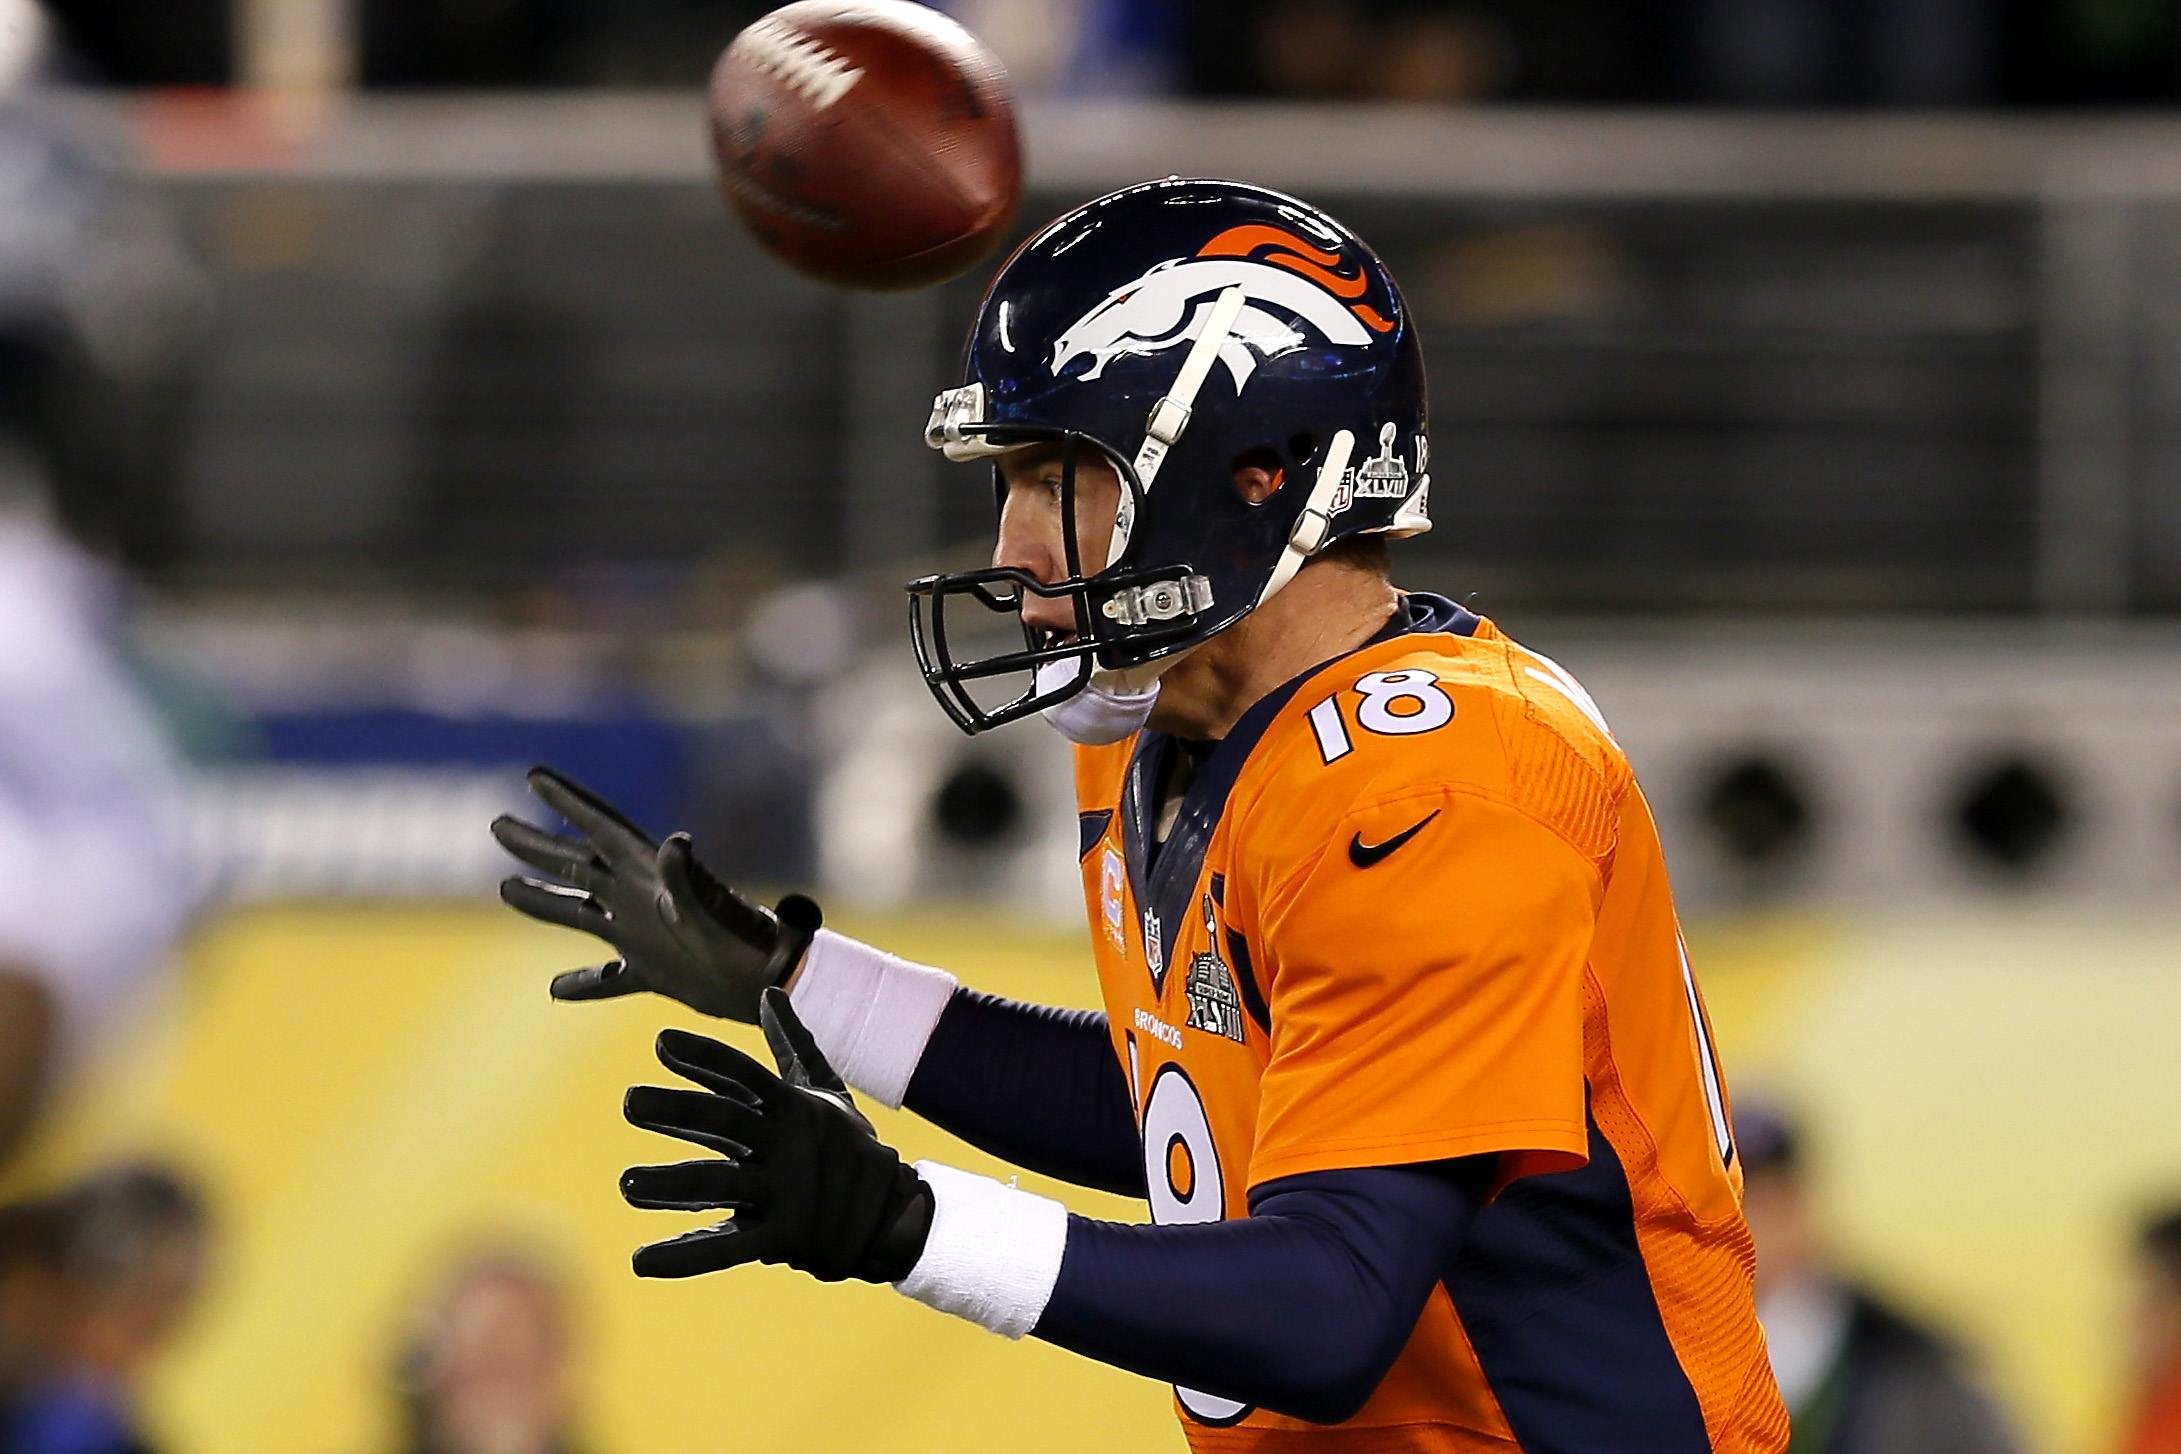 On the first play of Super Bowl XLVIII, the ball goes straight over Peyton Manning's head 